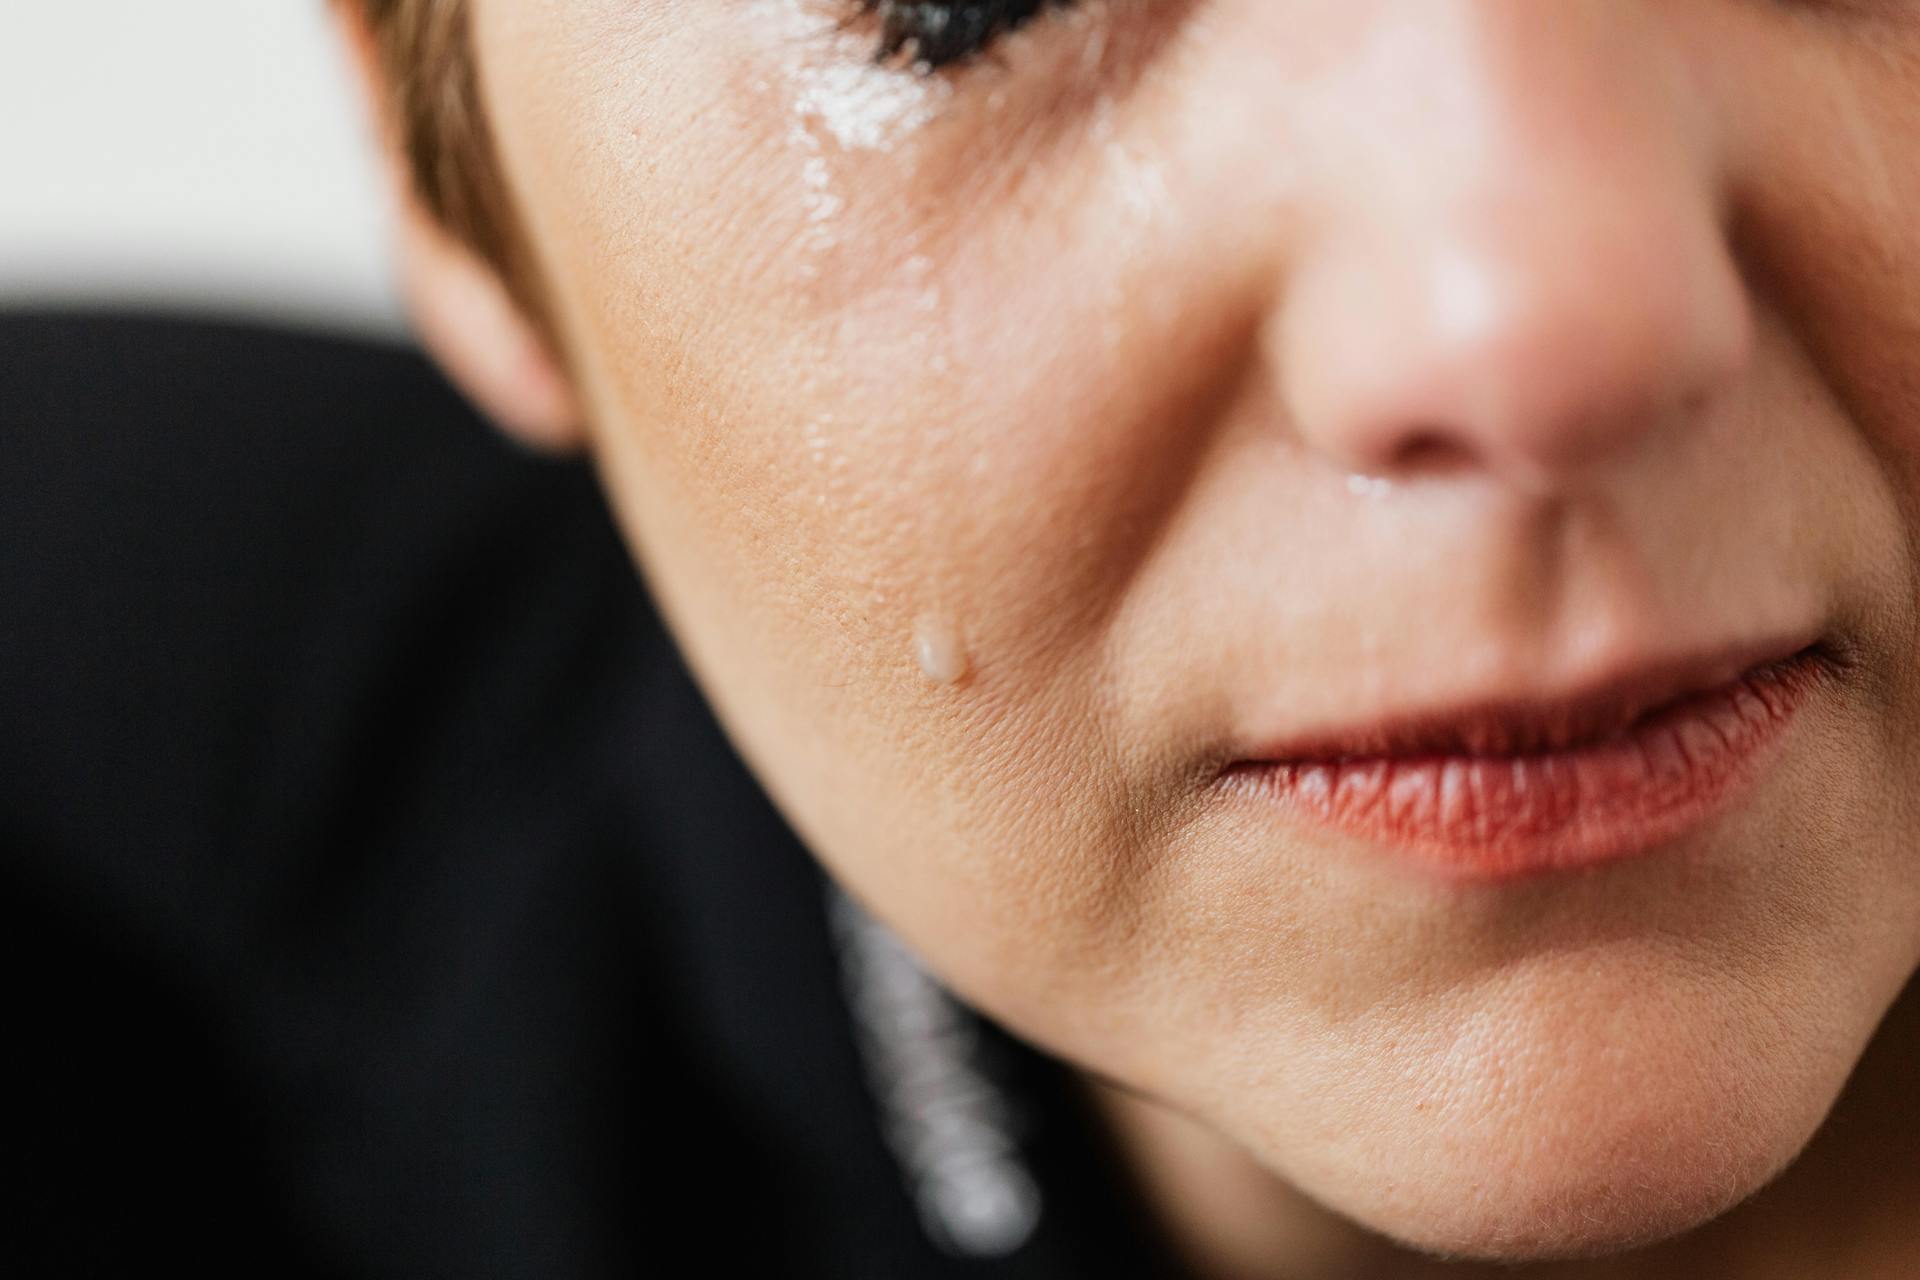 A close-up of a crying woman |  Source: Pexels